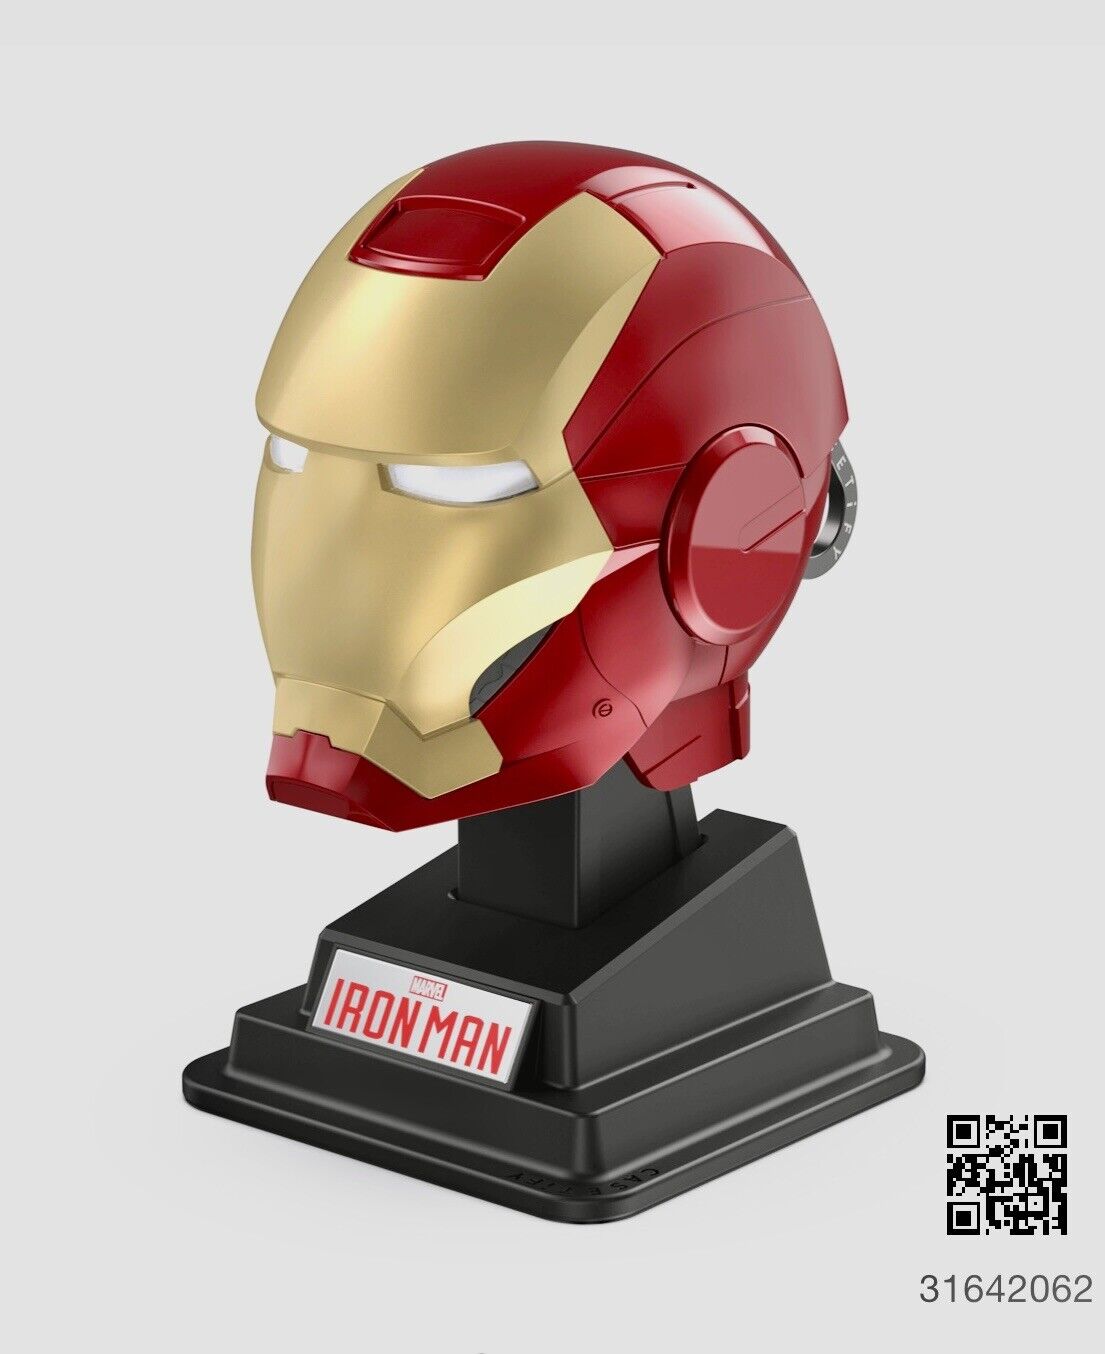 CASETiFY Limited Iron Man Helmet collectible AirPods Case with Stand & LED Eyes